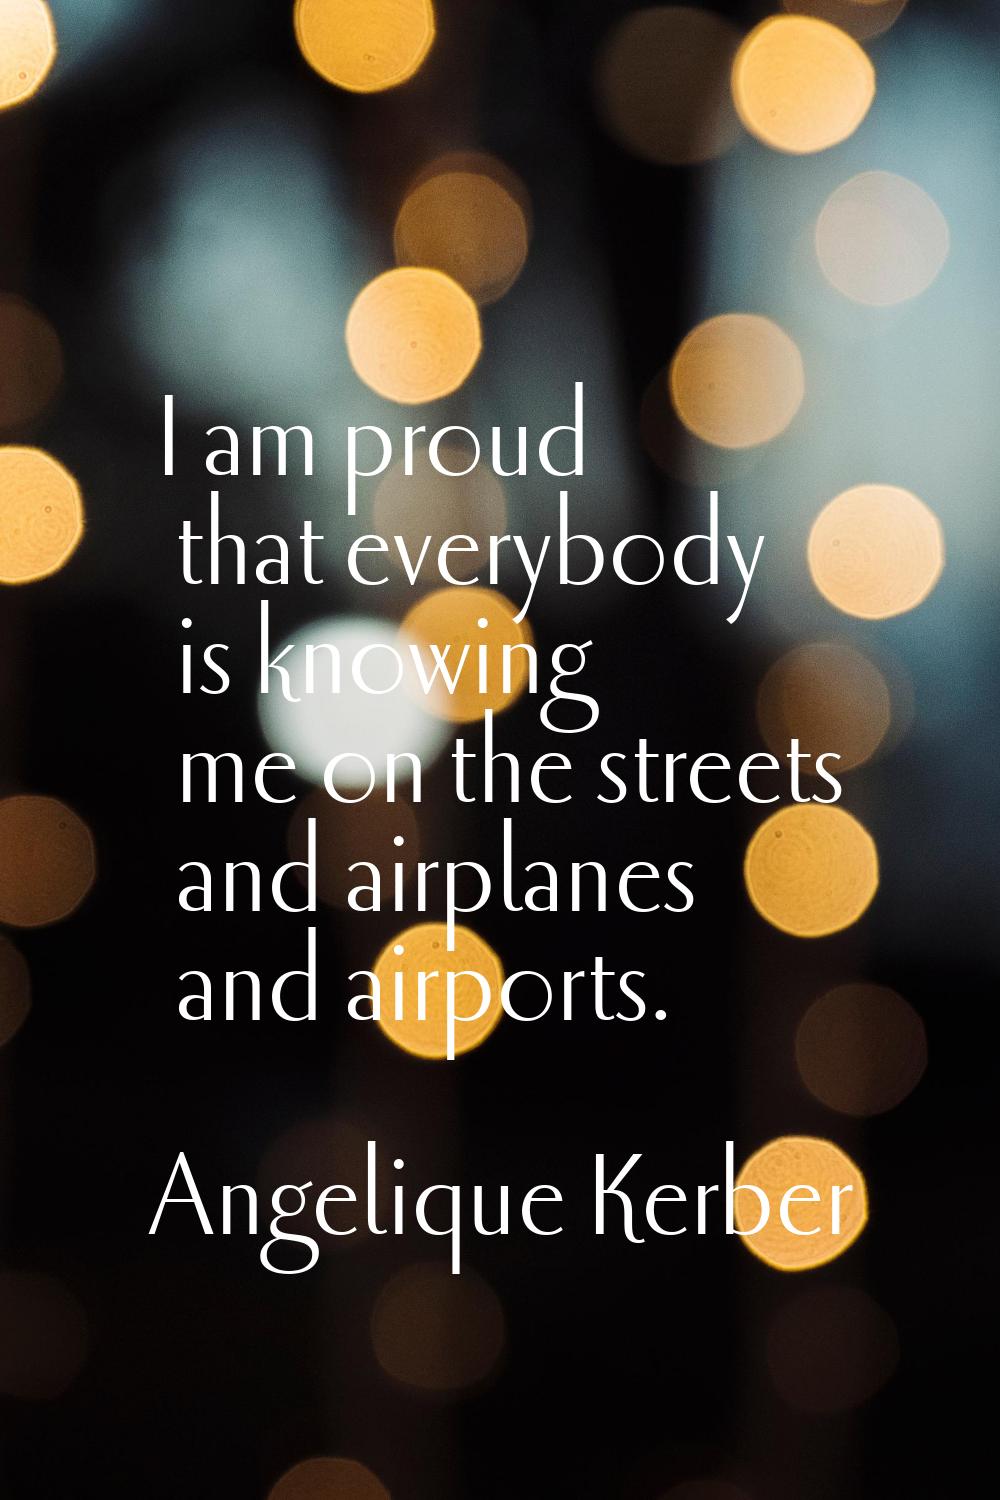 I am proud that everybody is knowing me on the streets and airplanes and airports.